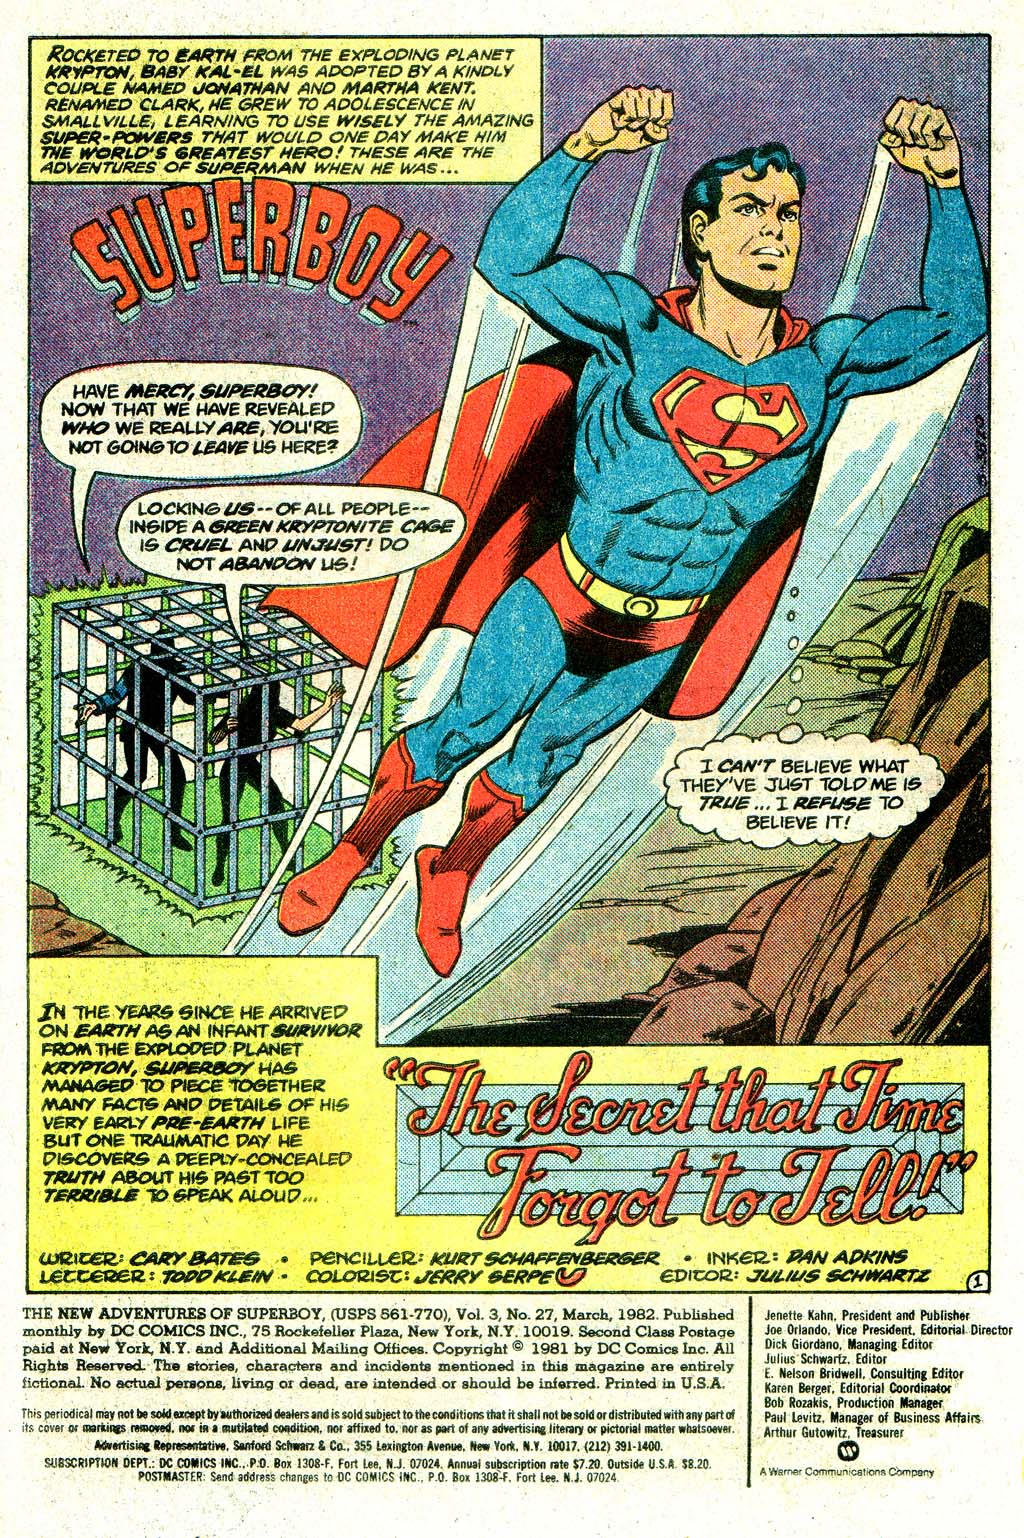 The New Adventures of Superboy 27 Page 2